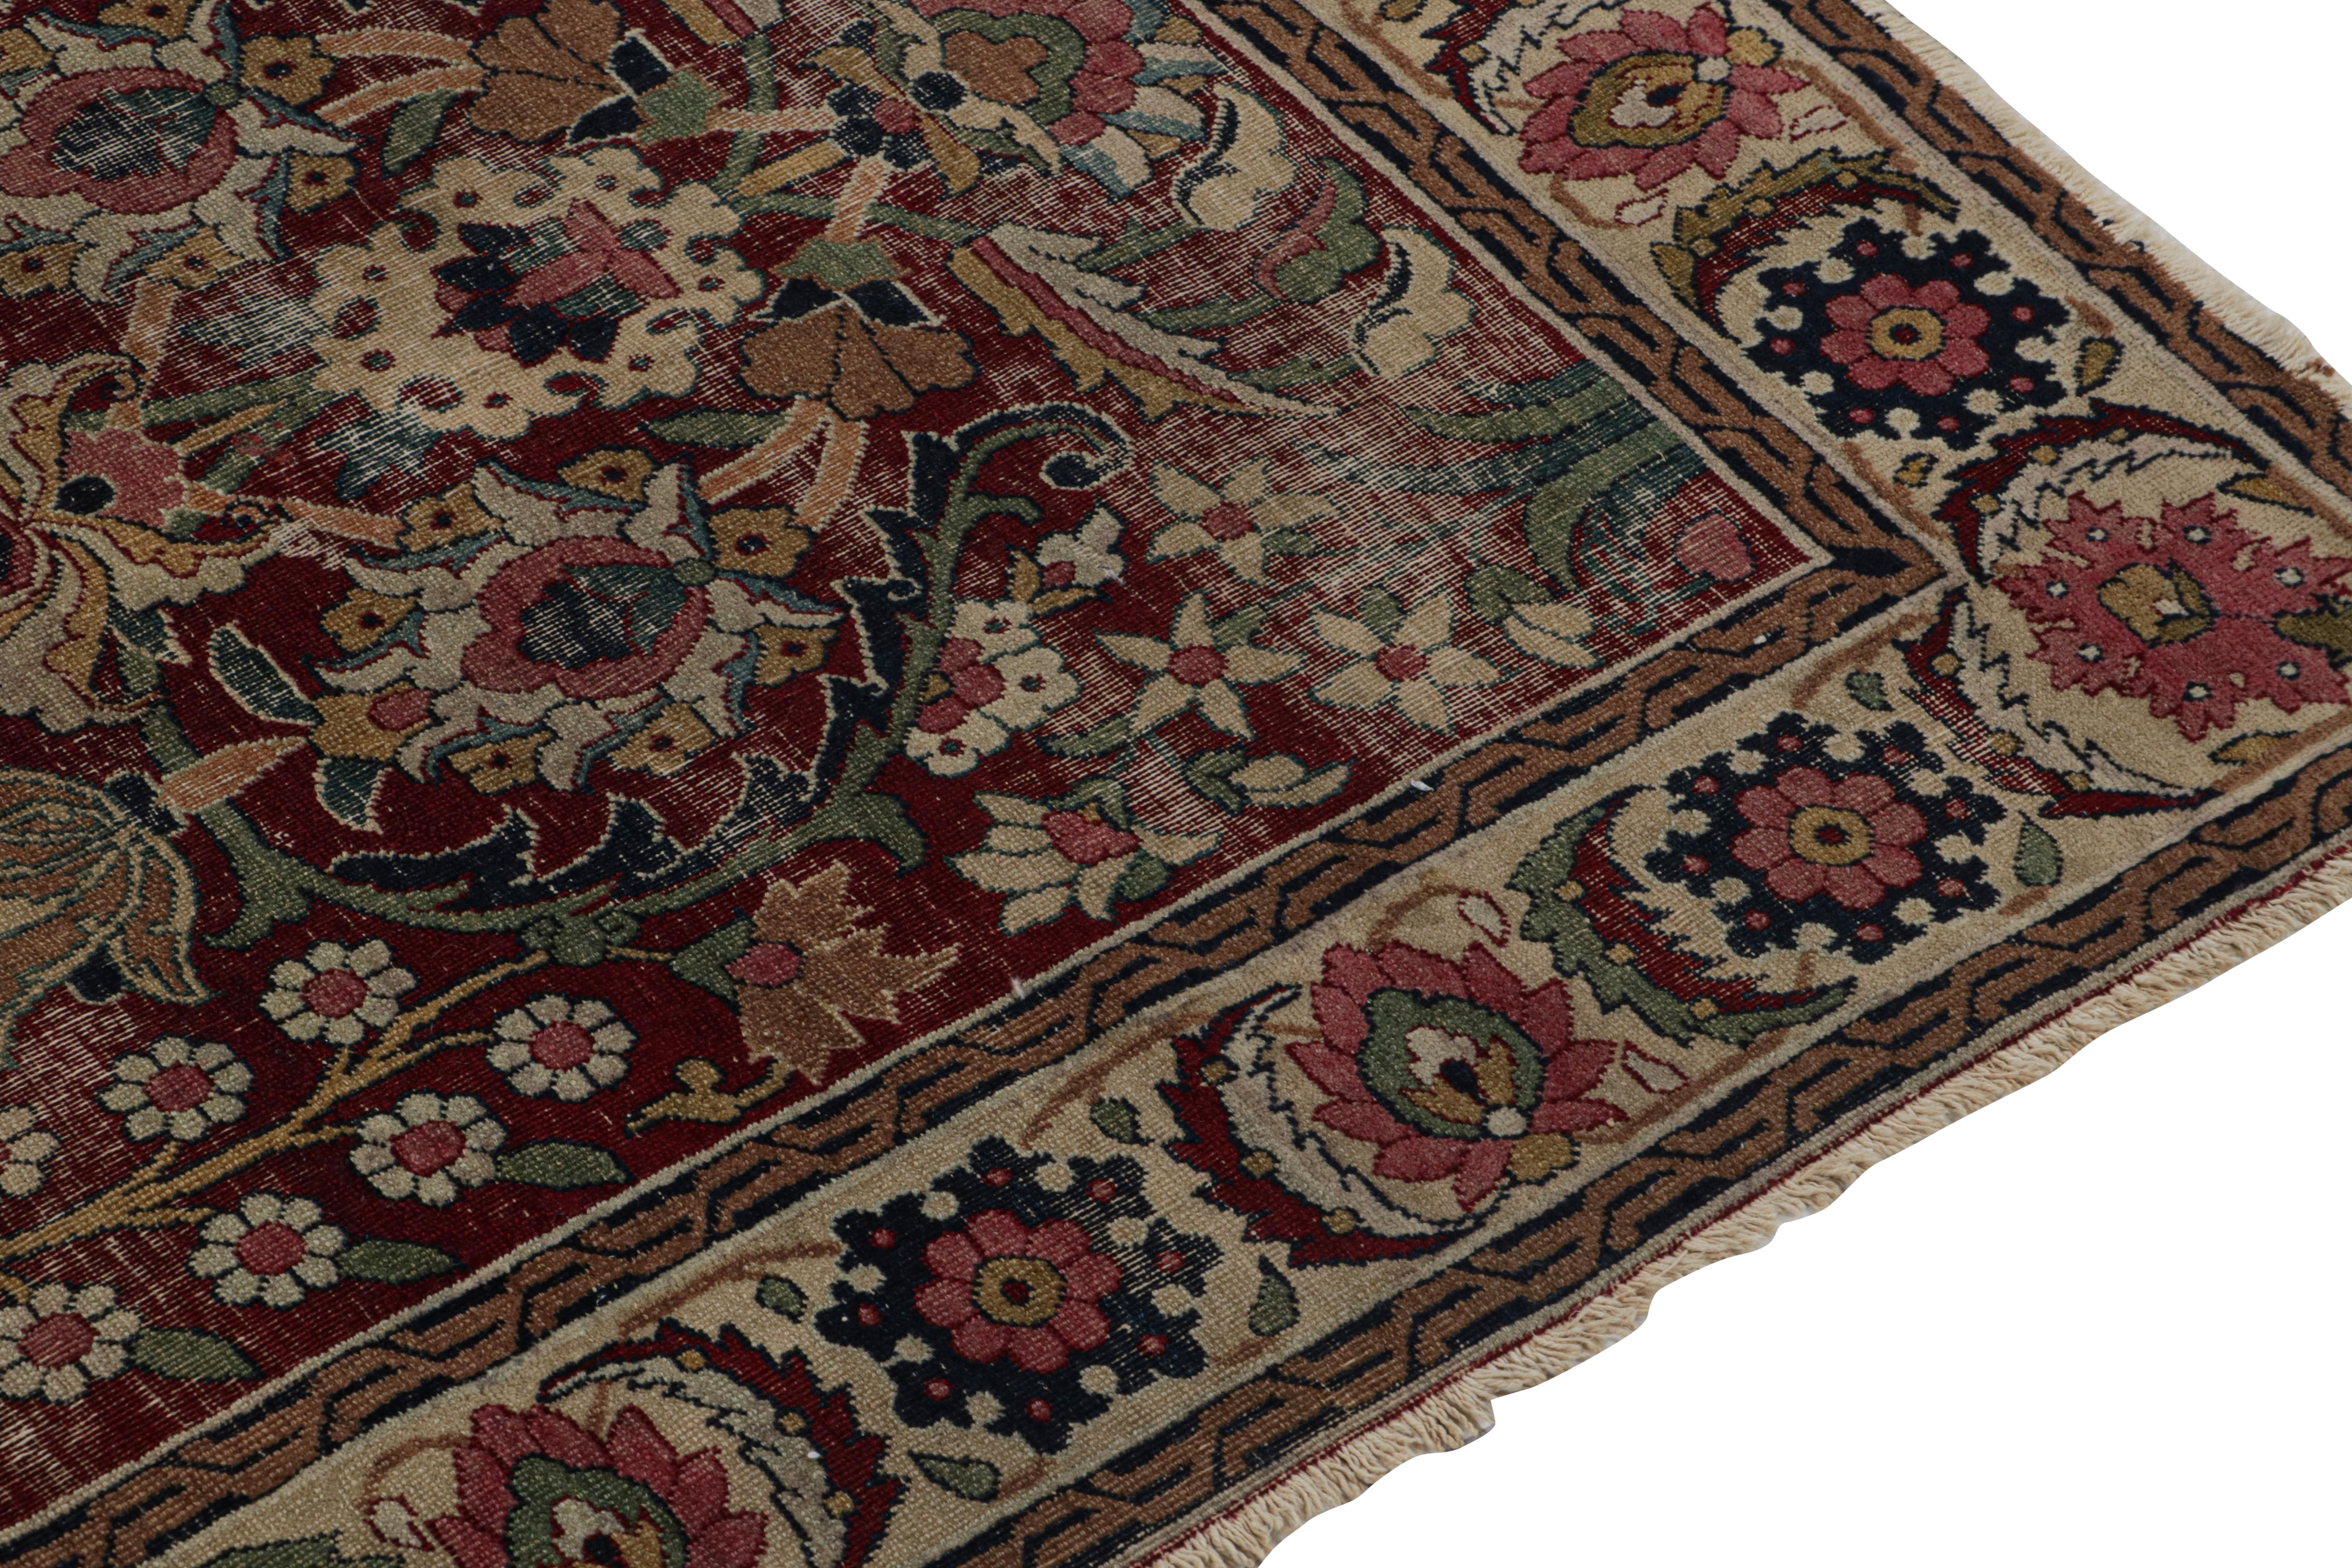 Antique Persian Khorassan Rug in Burgundy with Floral Patterns, from Rug & Kilim In Good Condition For Sale In Long Island City, NY